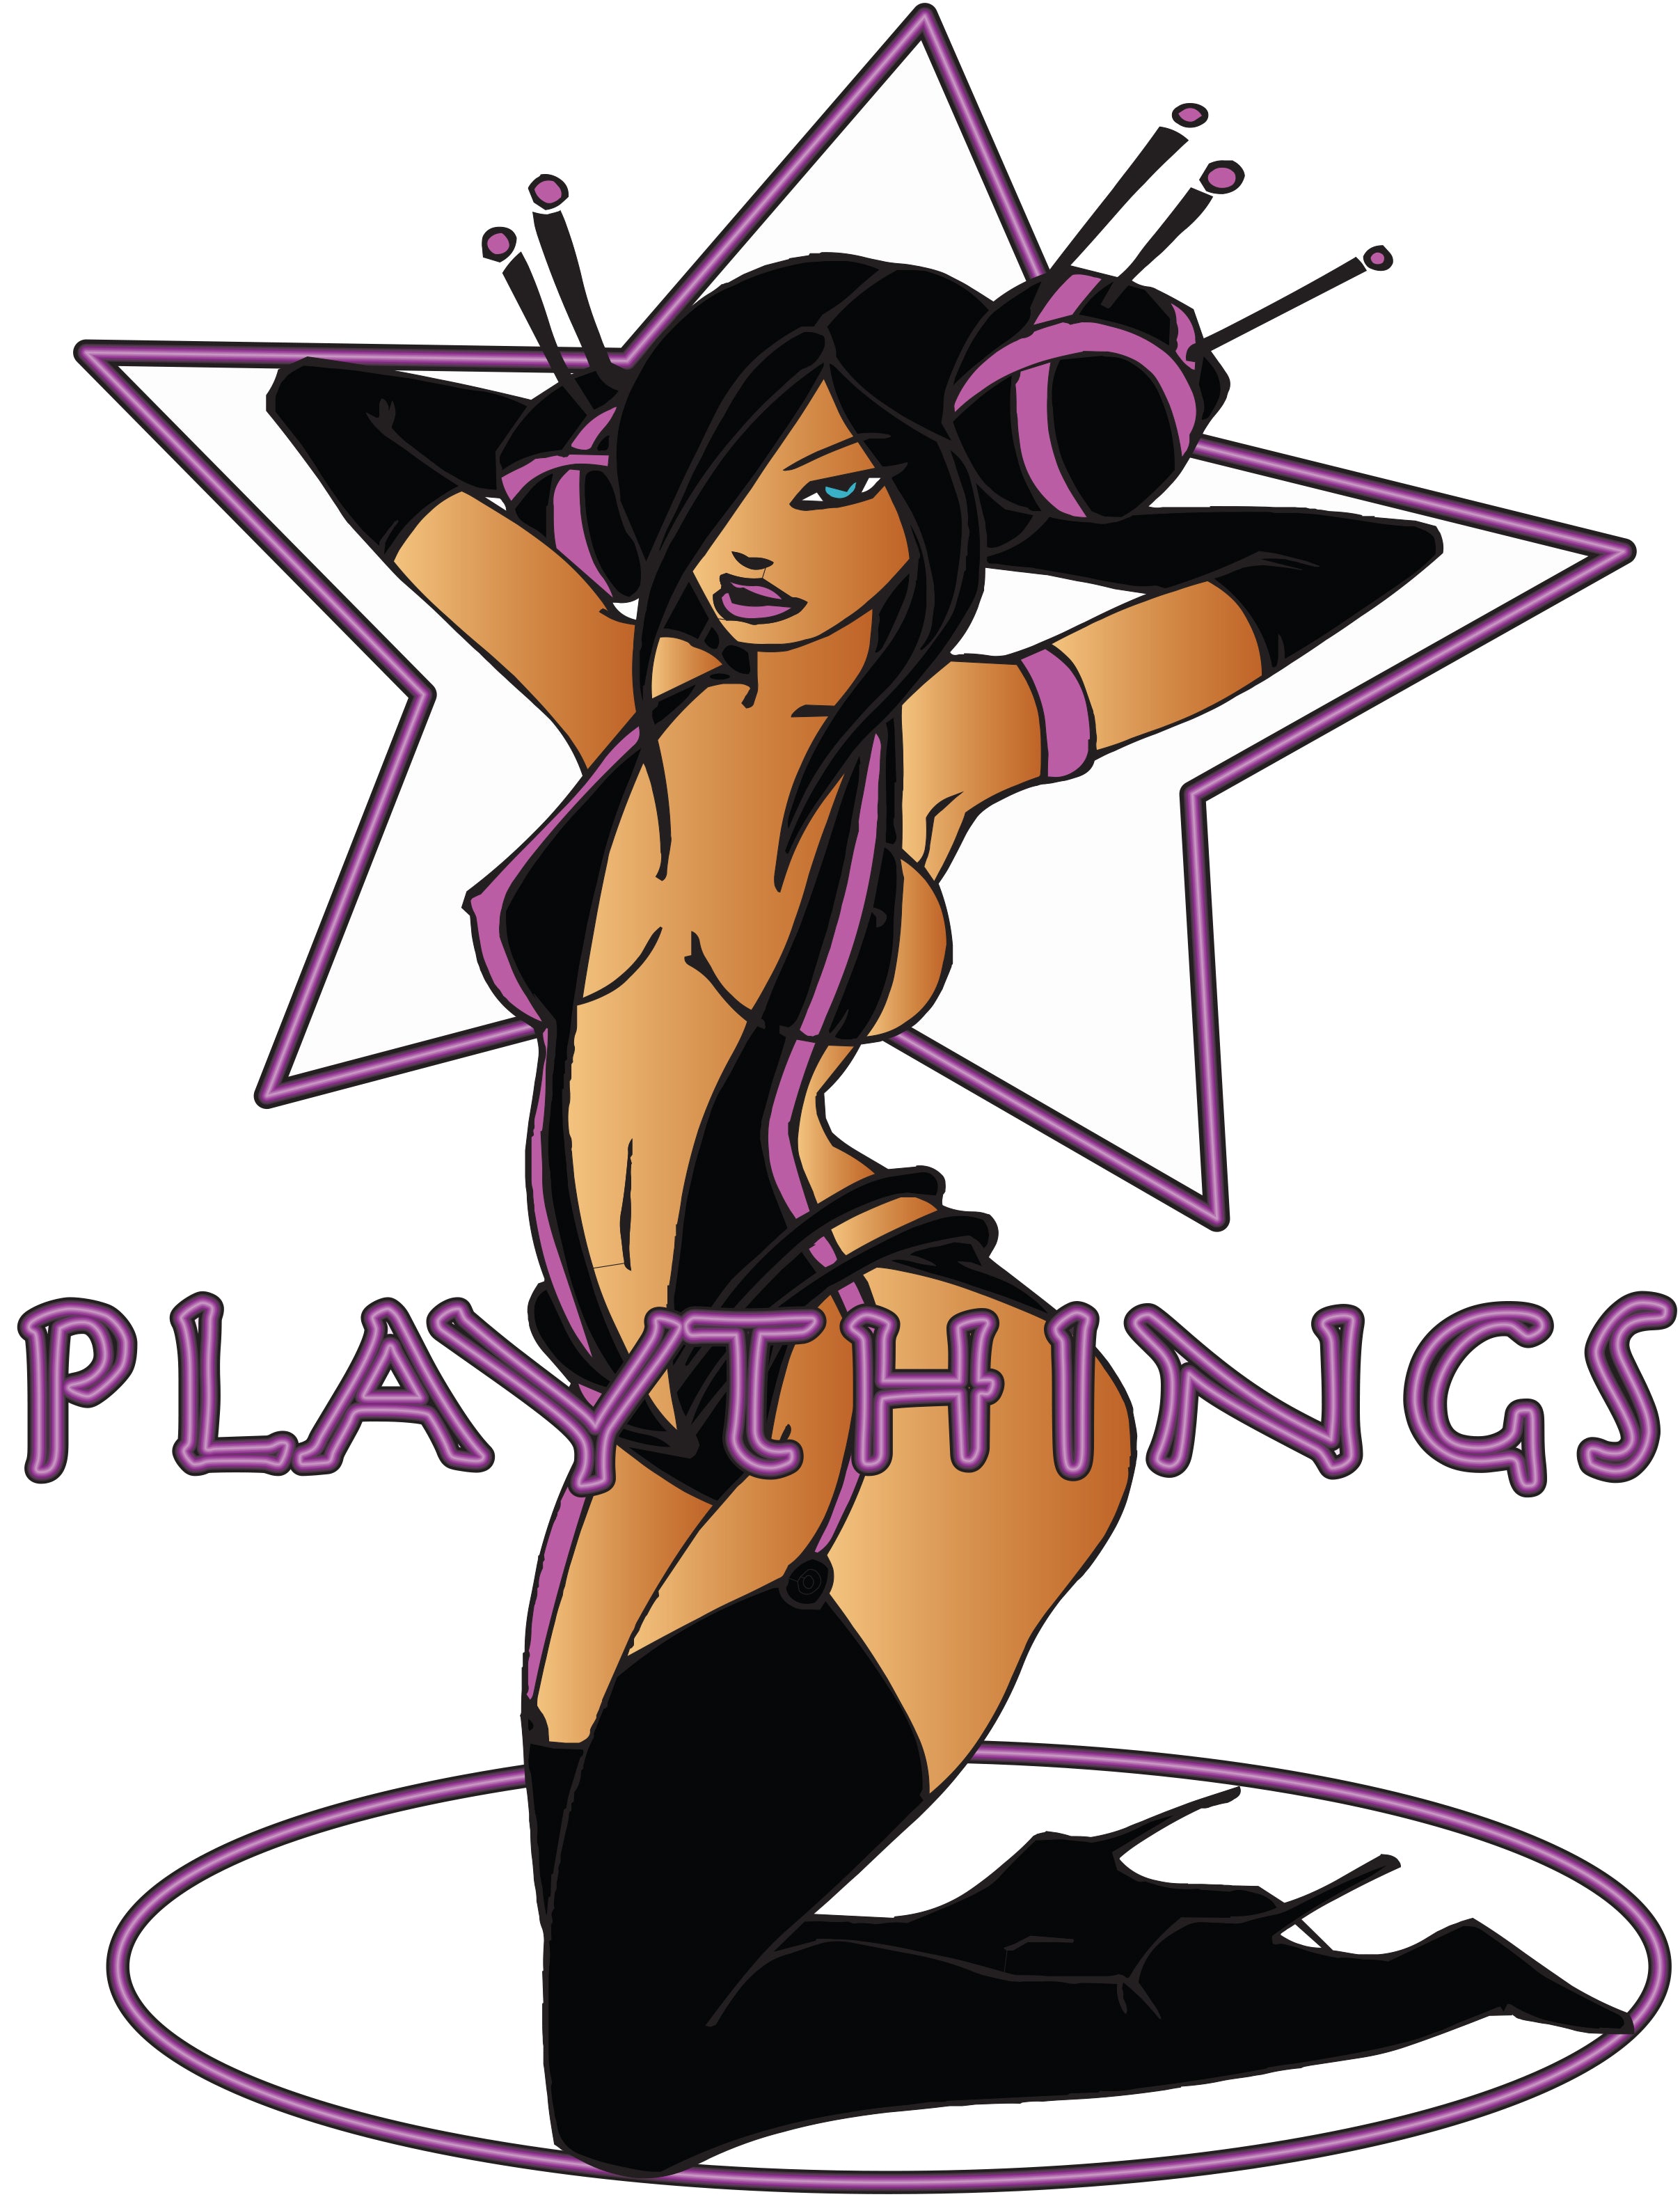 Playthings® - Sex Toys and Outfits Store Miami